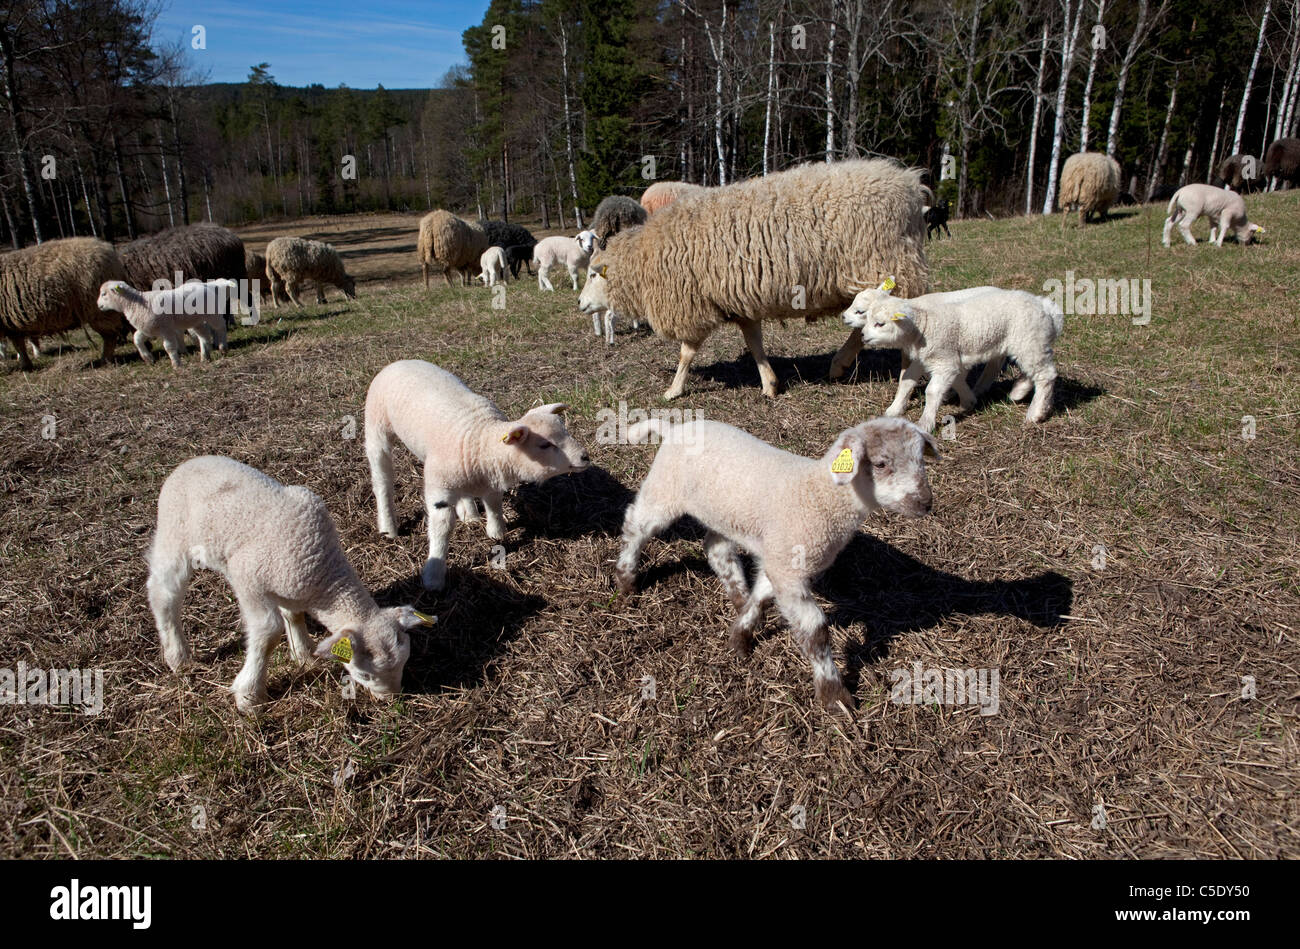 Sheep with lamb in the feedlot with trees in the background Stock Photo